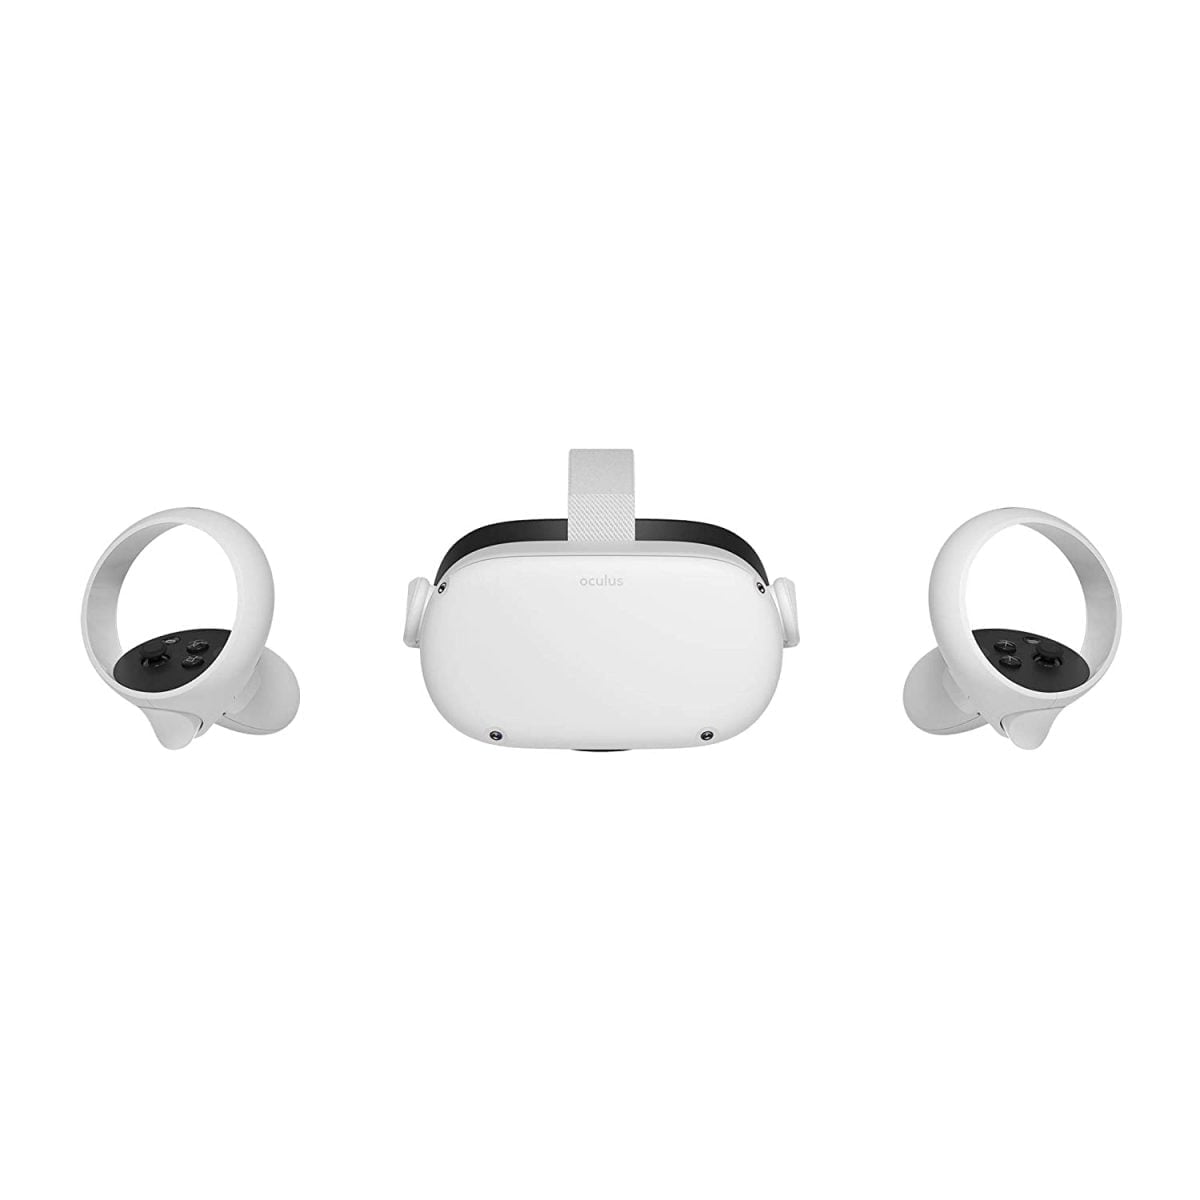 61Nrs7Qqzel. Sl1500 Oculus &Lt;H1&Gt;Oculus Quest 2 256 Gb Advanced All-In-One Virtual Reality Headset&Lt;/H1&Gt; Https://Youtu.be/Atvgl9Wojsm &Lt;Ul Class=&Quot;A-Unordered-List A-Vertical A-Spacing-Mini&Quot;&Gt; &Lt;Li&Gt;&Lt;Span Class=&Quot;A-List-Item&Quot;&Gt;Voltage: 100-240 V&Lt;/Span&Gt;&Lt;/Li&Gt; &Lt;Li&Gt;&Lt;Span Class=&Quot;A-List-Item&Quot;&Gt;Next-Level Hardware - Make Every Move Count With A Blazing-Fast Processor And Our Highest-Resolution Display&Lt;/Span&Gt;&Lt;/Li&Gt; &Lt;Li&Gt;&Lt;Span Class=&Quot;A-List-Item&Quot;&Gt;All-In-One Gaming - With Backward Compatibility, You Can Explore New Titles And Old Favorites In The Expansive Quest Content Library&Lt;/Span&Gt;&Lt;/Li&Gt; &Lt;Li&Gt;&Lt;Span Class=&Quot;A-List-Item&Quot;&Gt;Immersive Entertainment - Get The Best Seat In The House To Live Concerts, Groundbreaking Films, Exclusive Events And More&Lt;/Span&Gt;&Lt;/Li&Gt; &Lt;Li&Gt;&Lt;Span Class=&Quot;A-List-Item&Quot;&Gt;Easy Setup - Just Open The Box, Set Up With The Smartphone App And Jump Into Vr. No Pc Or Console Needed. Requires Wireless Internet Access And The Oculus App (Free Download) To Set Up Device Premium Display - Catch Every Detail With A Stunning Display That Features 50% More Pixels Than The Original Quest Ultimate Control - Redesigned Oculus Touch Controllers Transport Your Movements Directly Into Vr With Intuitive Controls Pc Vr Compatible - Step Into Incredible Oculus Rift Titles By Connecting An Oculus Link Cable To A Compatible Gaming Pc. Oculus Link Cable Sold Separately 3D Cinematic Sound - Hear In All Directions With Built-In Speakers That Deliver Cinematic 3D Positional Audio&Lt;/Span&Gt;&Lt;/Li&Gt; &Lt;/Ul&Gt; &Nbsp; Oculus Quest 2 Oculus Quest 2 256 Gb - Advanced All-In-One Virtual Reality Headset